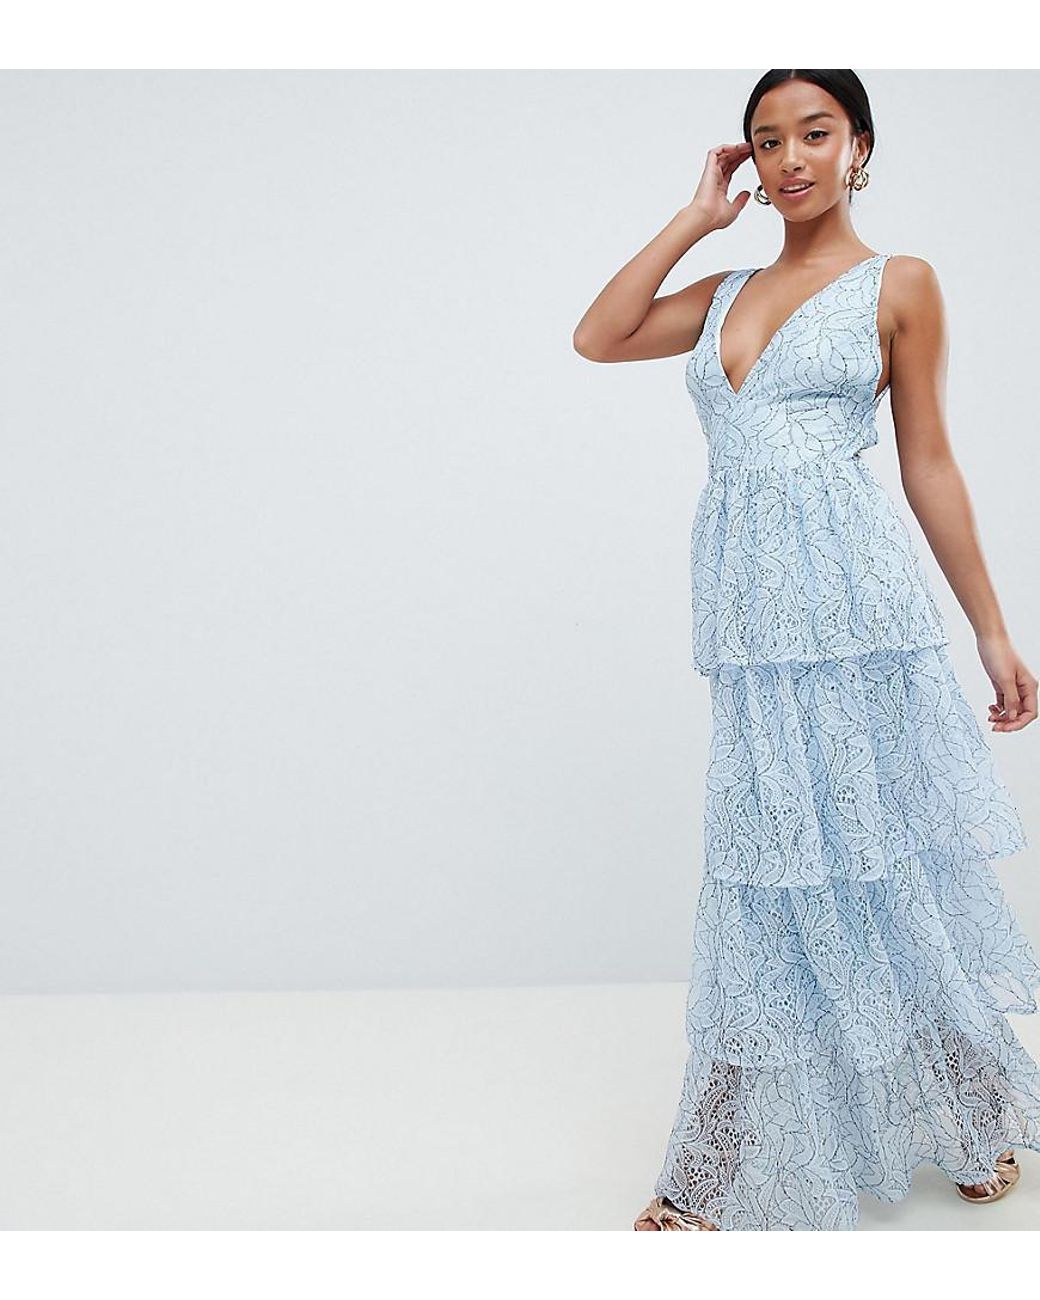 Missguided Exclusive Petite Lace Tiered Maxi Dress in Blue | Lyst